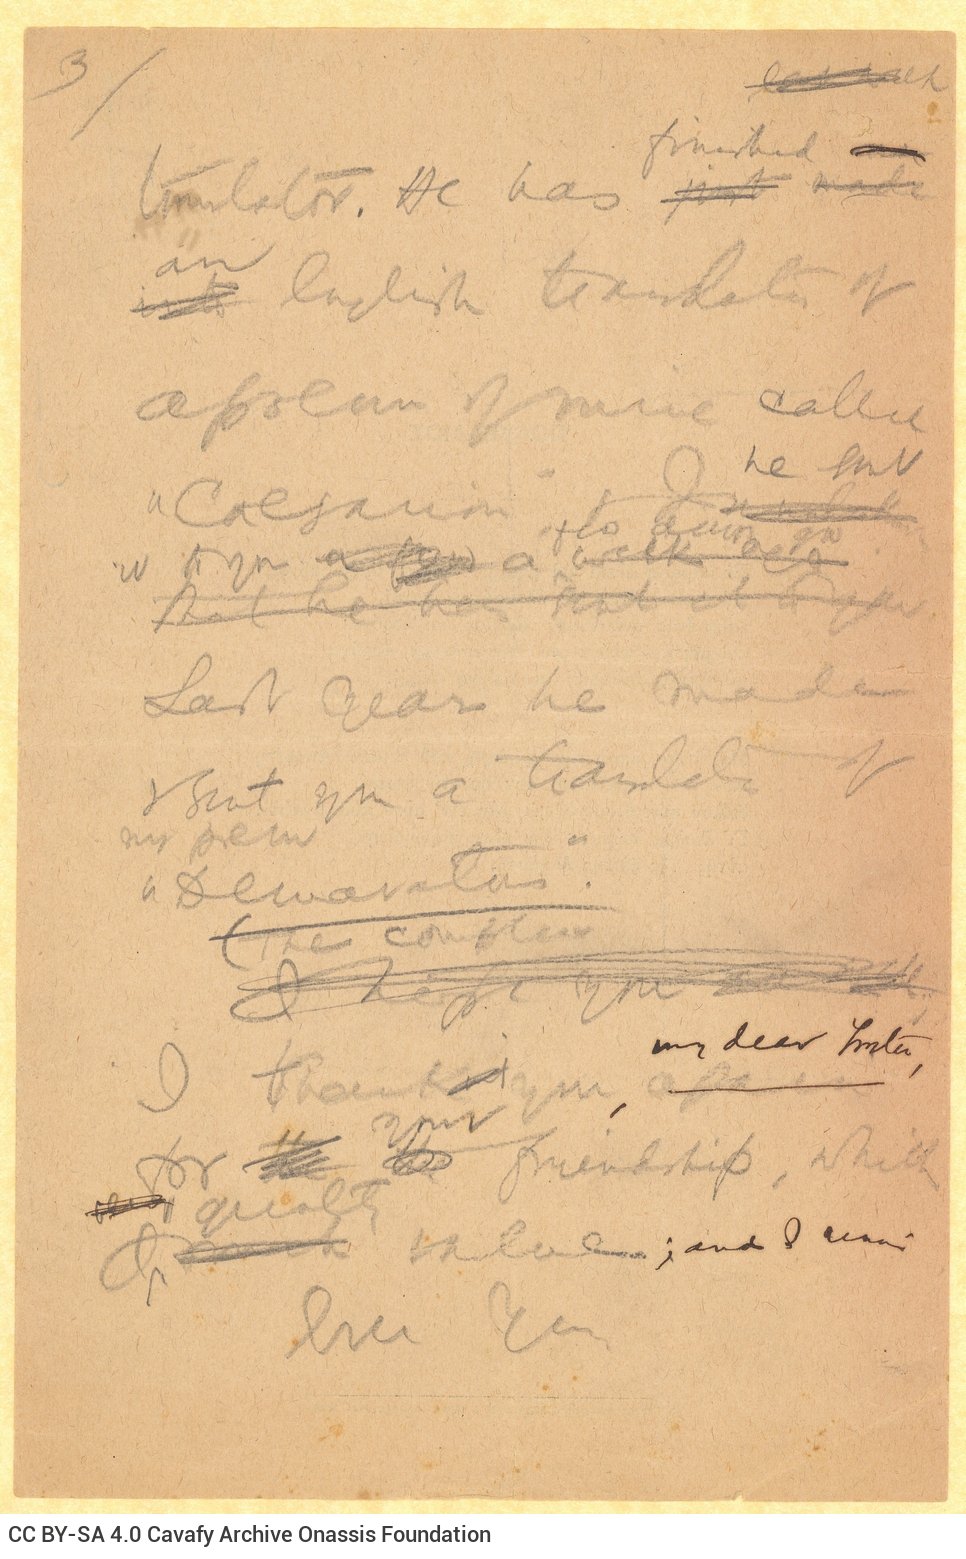 Handwritten draft letter by Cavafy to E. M. Forster regarding the translations of poems of his into English, written on both 